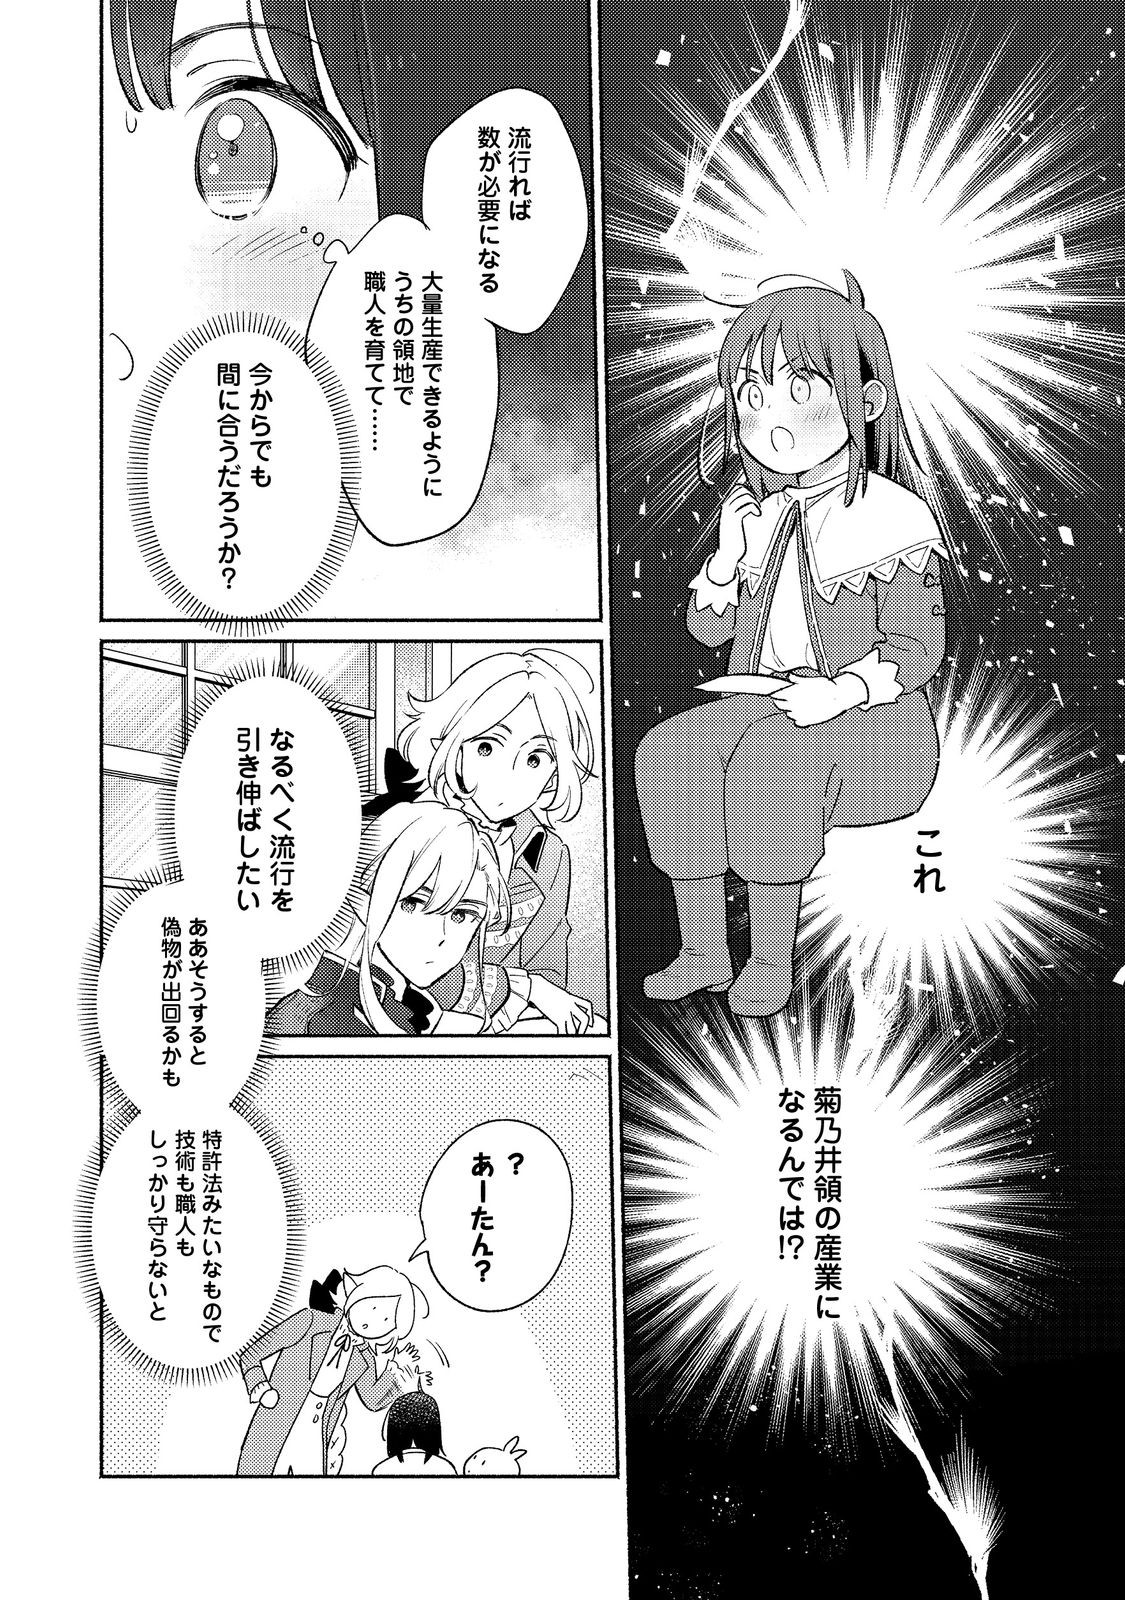 I’m the White Pig Nobleman 第19.1話 - Page 10